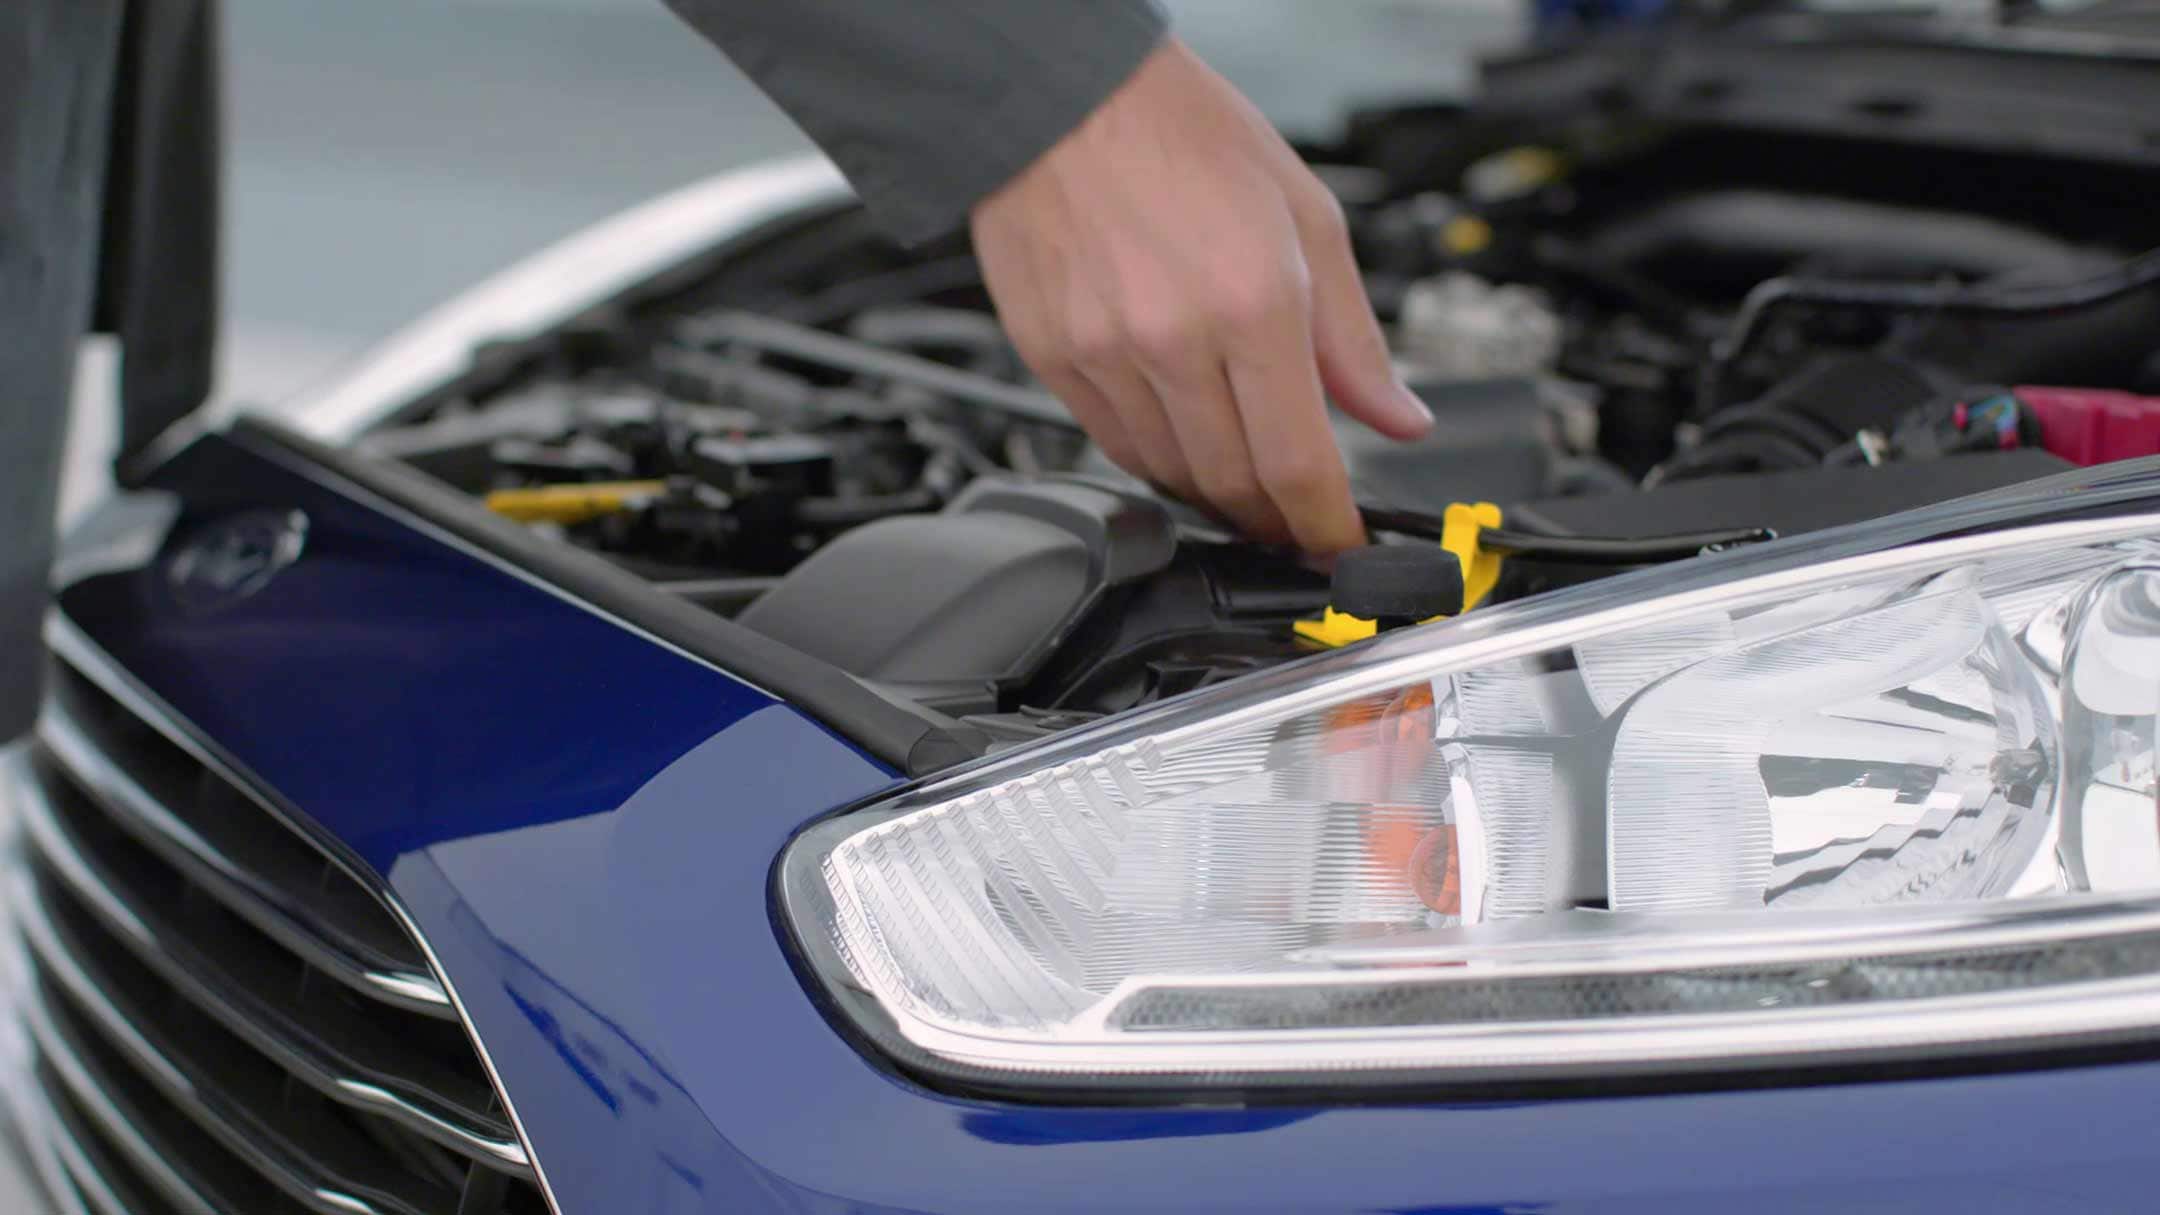 HOW TO OPEN AND CLOSE YOUR BONNET CORRECTLY